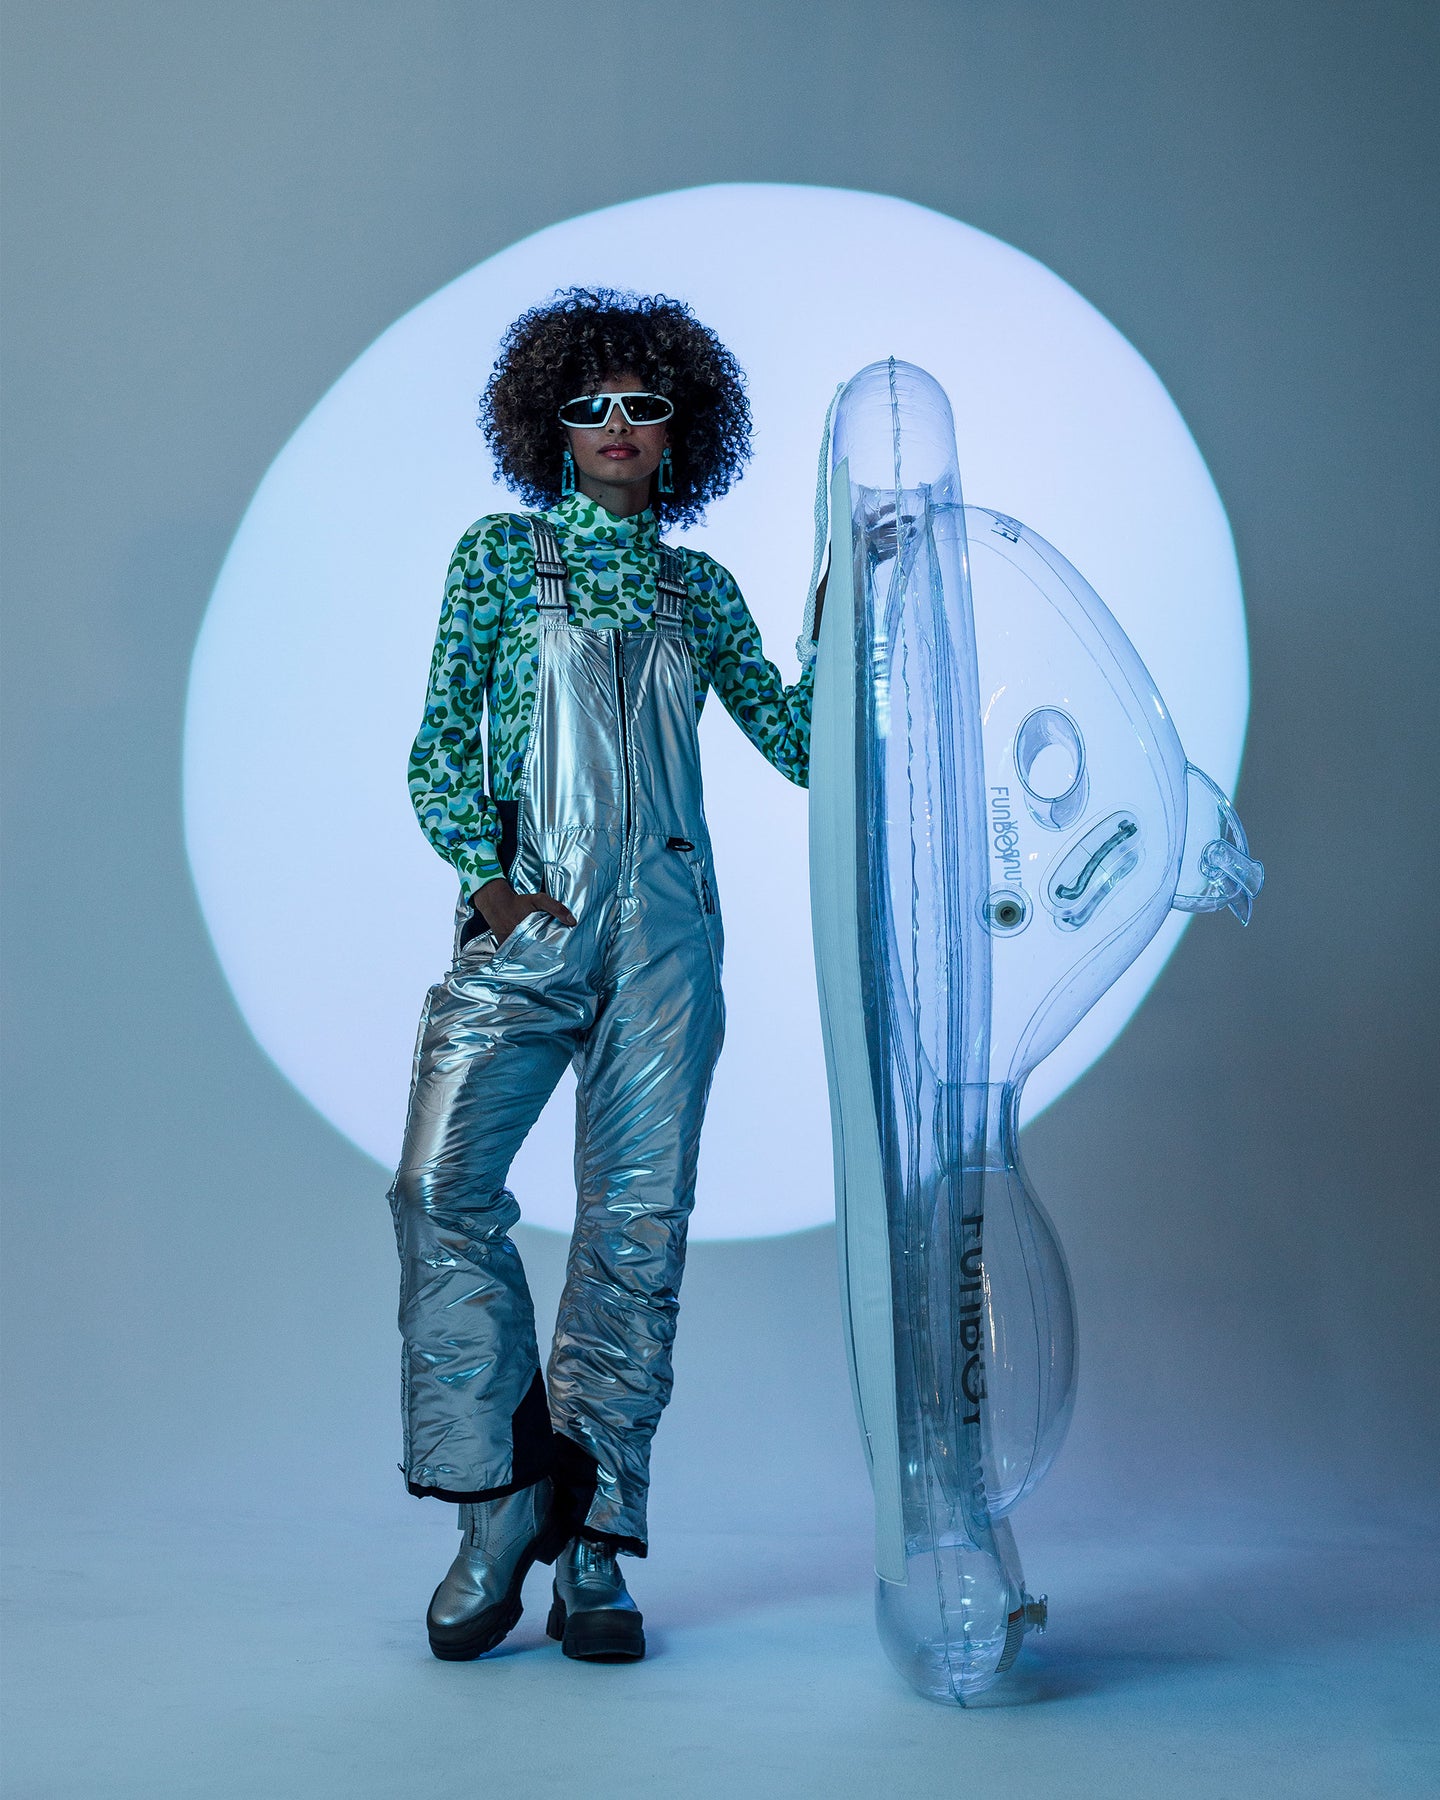 Women is standing holding up the Funboy Super Clear Snowmobile Snow Sled. She's posing in a metallic silver ski suit with futuristic sunglasses & metallic silver boots. The background is grey with a white/blue colored circled that's lit up. 